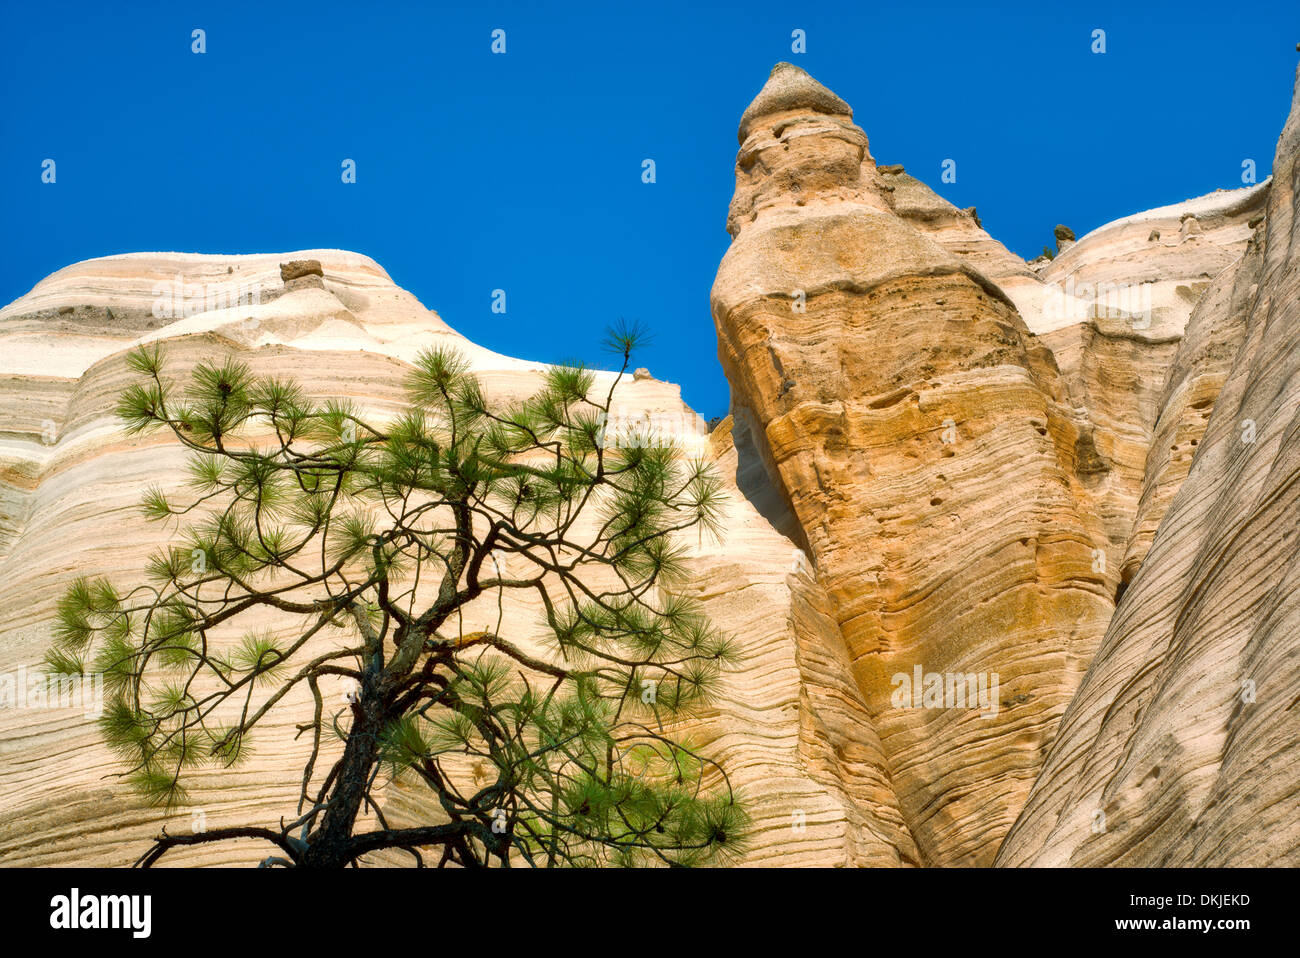 Ponderosa Pine tree silhouetted against rock formation in Tent Rocks National Monument, New Mexico Stock Photo